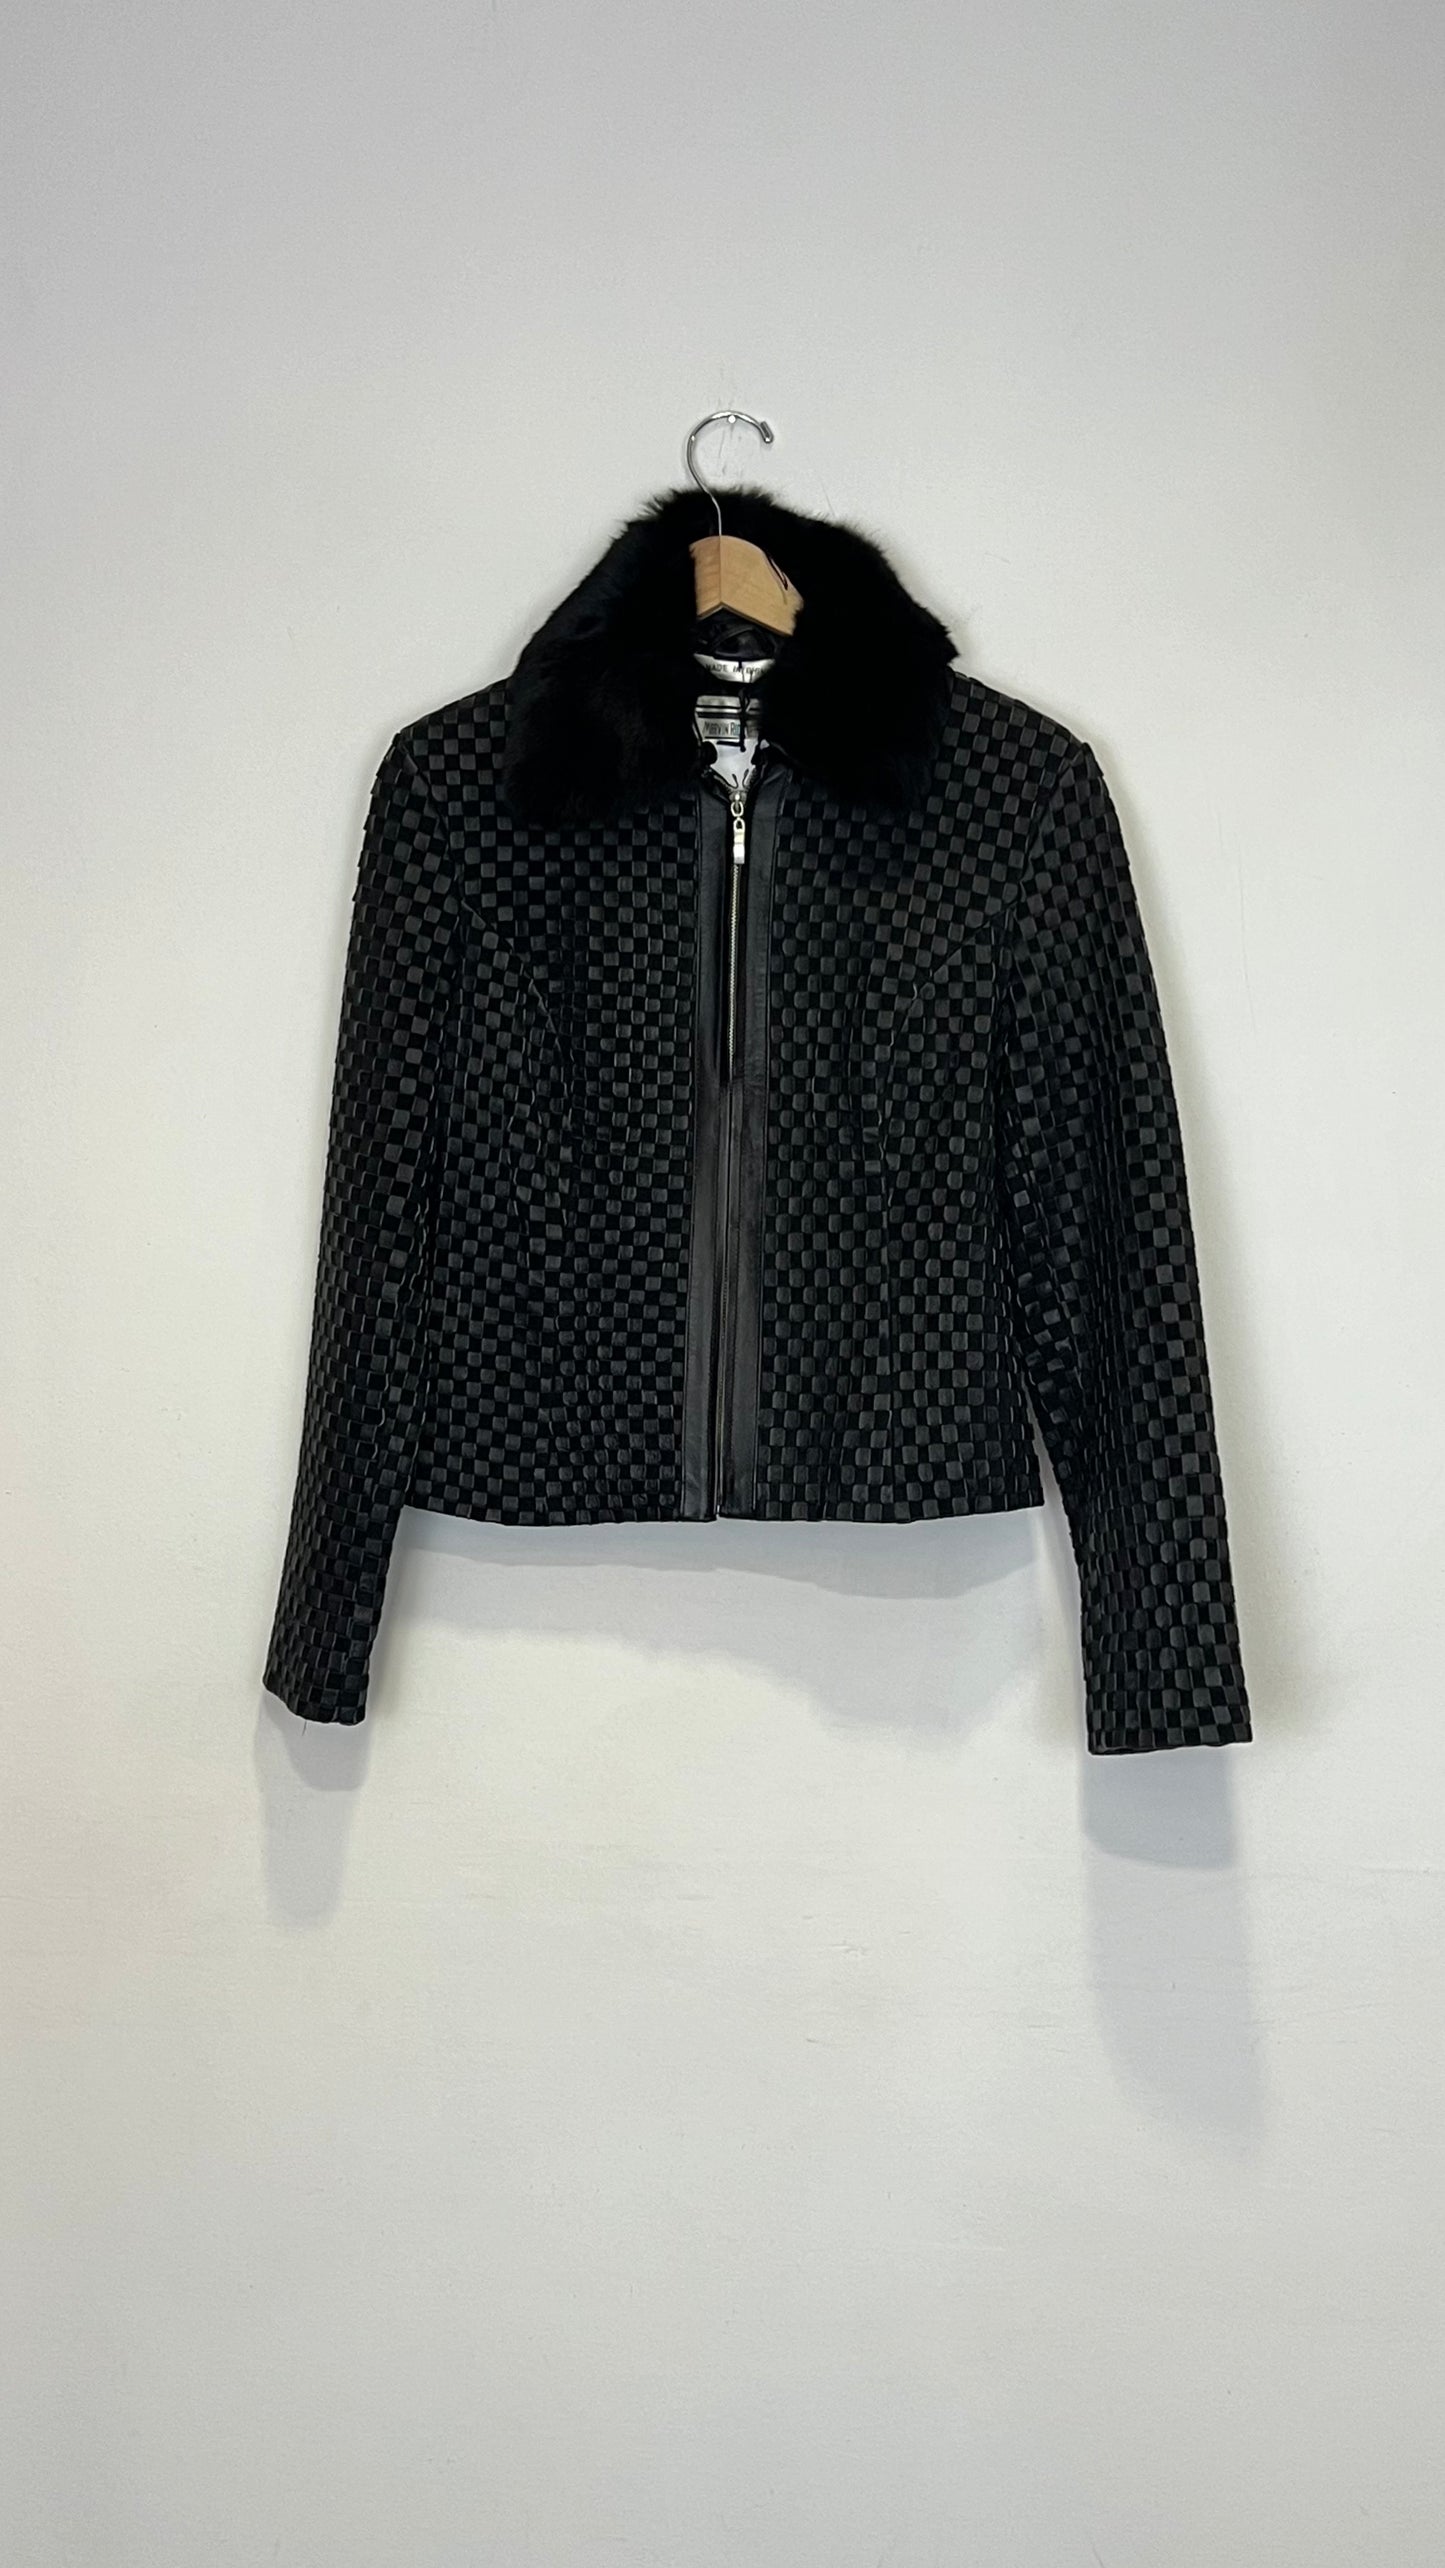 Black Woven Leather Jacket w/ Removable Collar